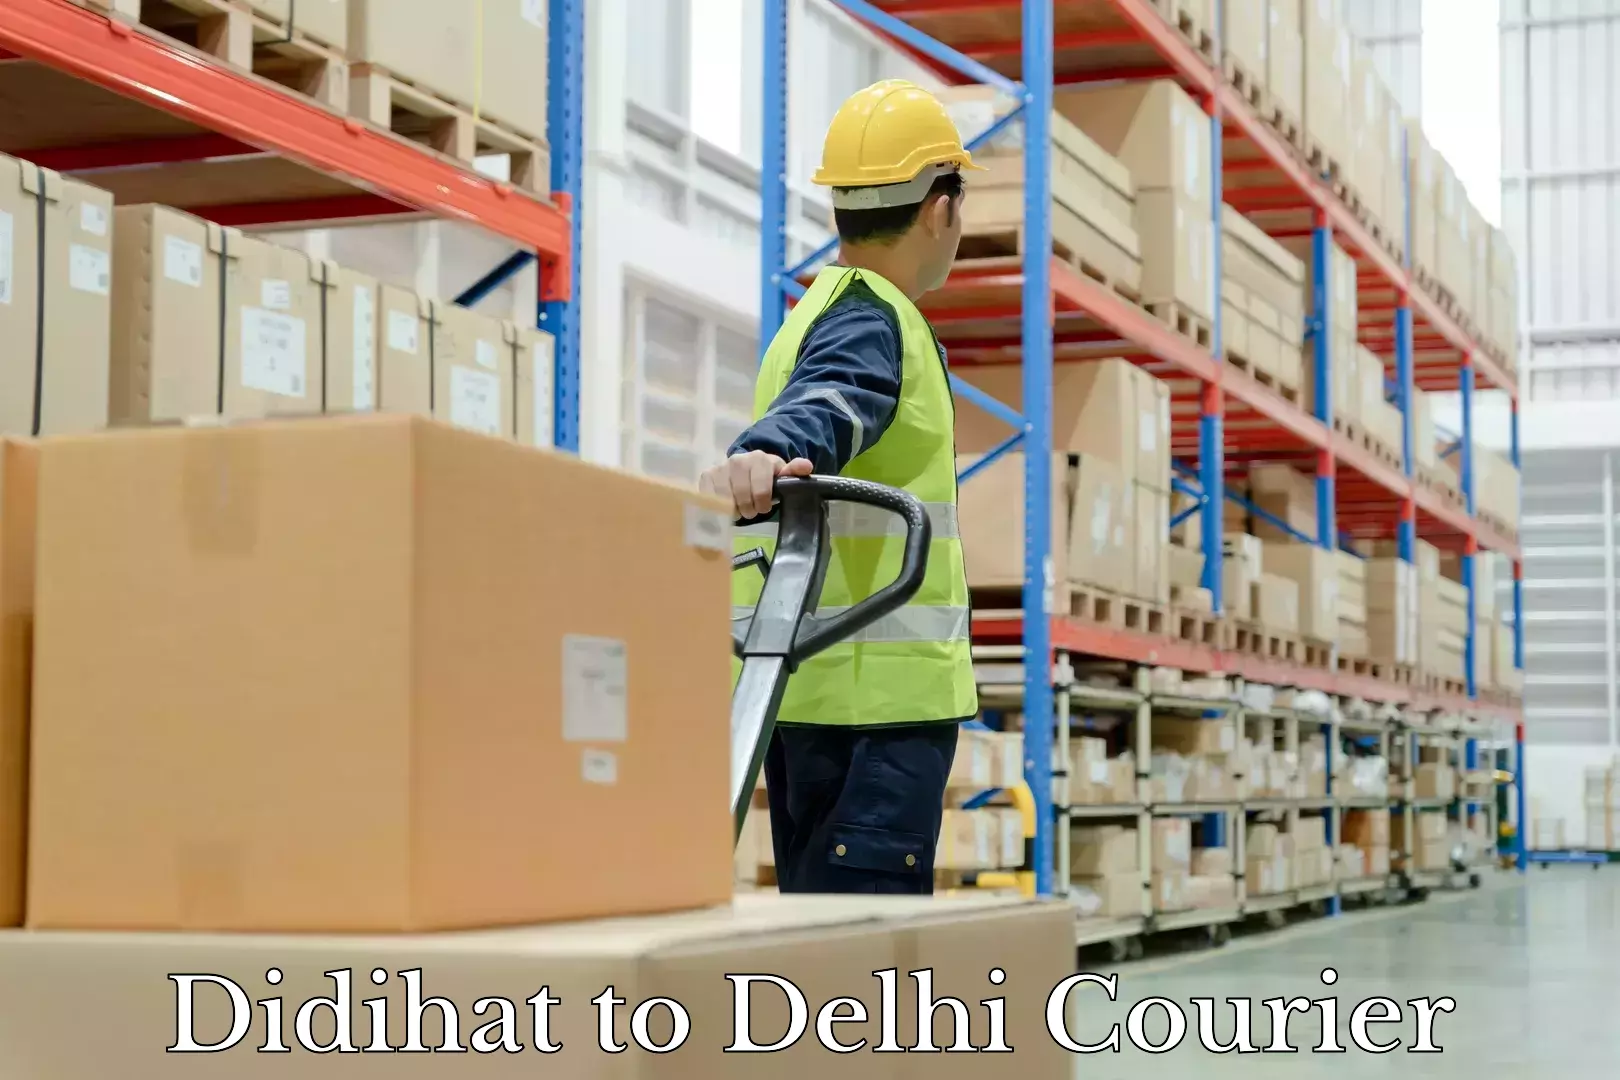 Personalized luggage shipping in Didihat to University of Delhi